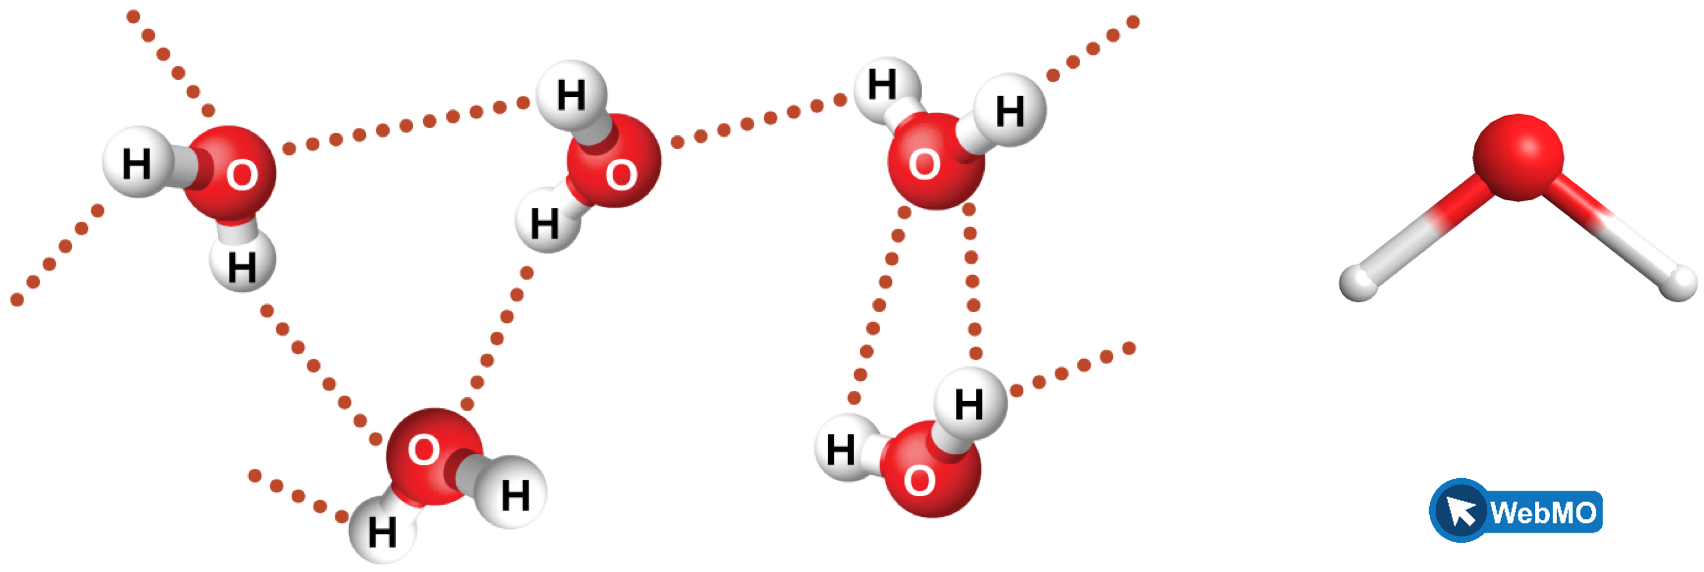 Five water molecules are shown near one another, but not touching. A dotted line lies between many of the hydrogen atoms on one molecule and the oxygen atom on another molecule.